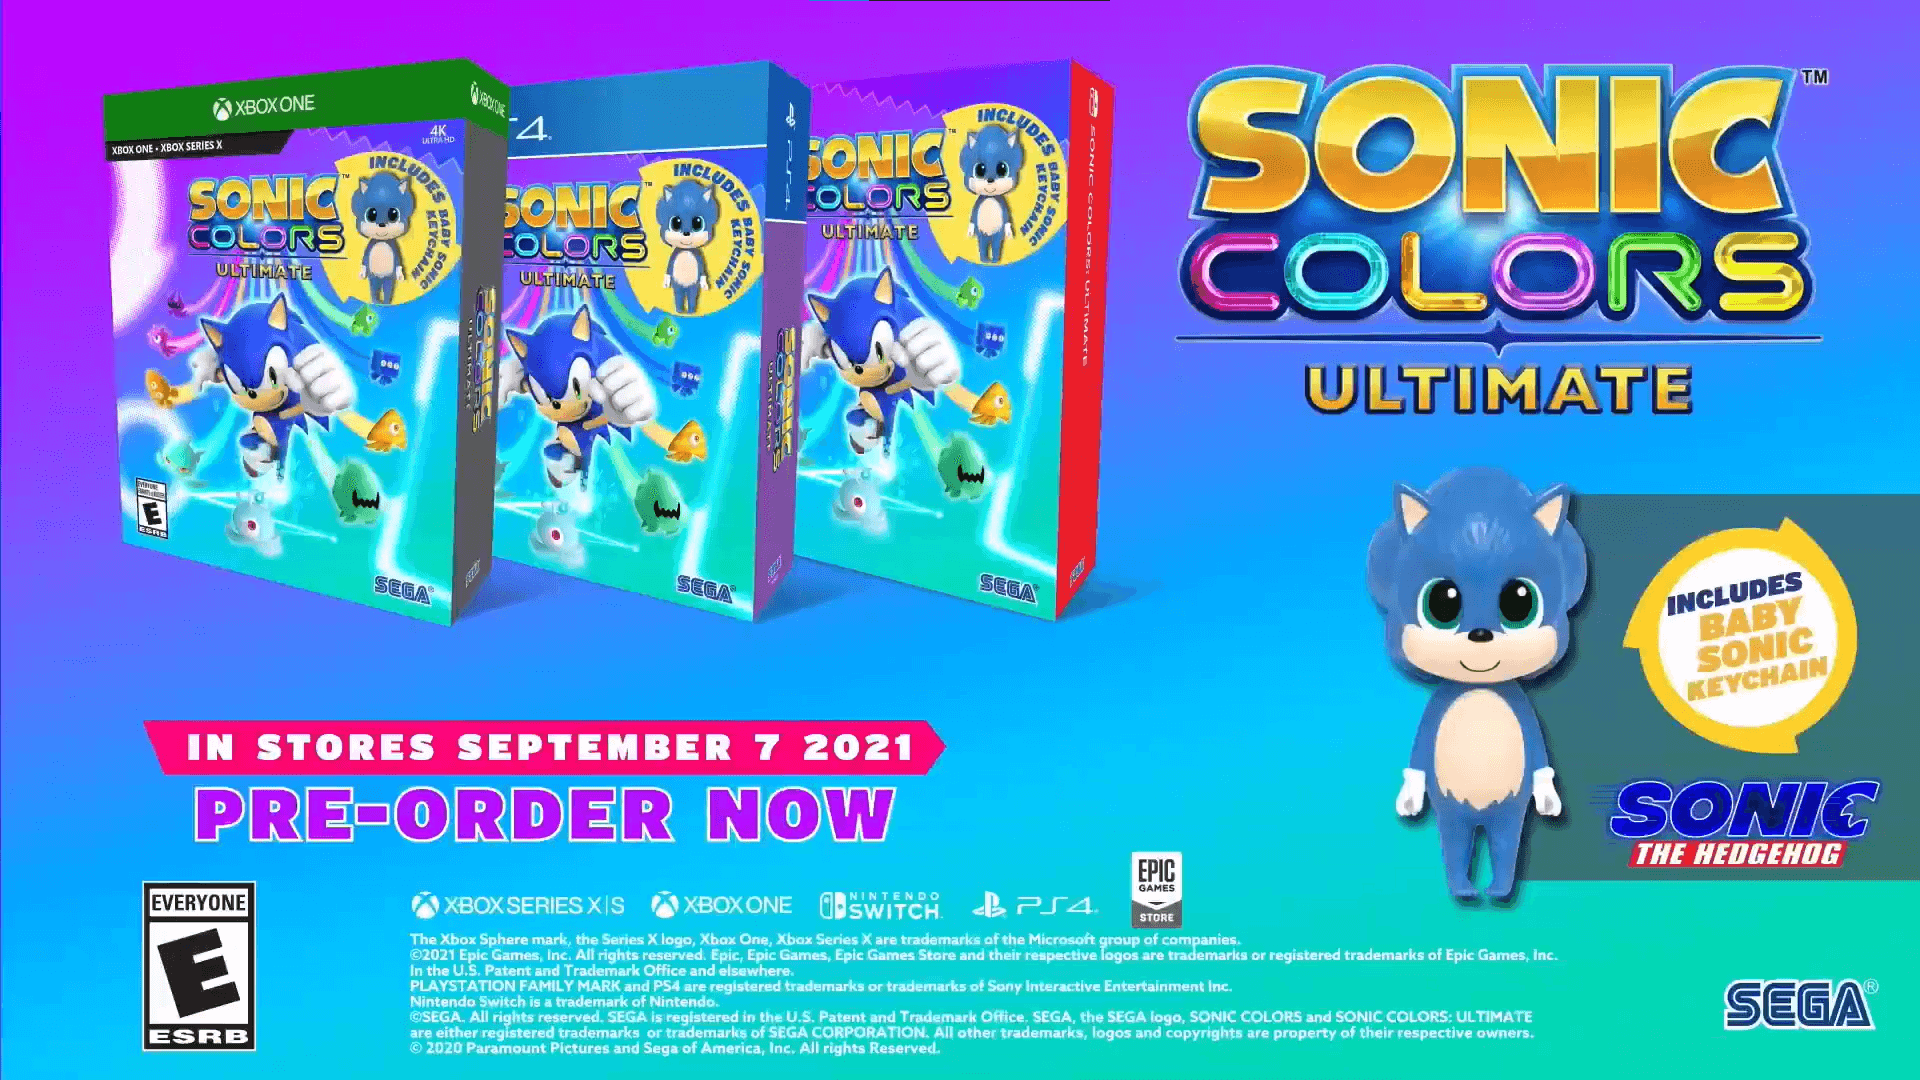 Sonic Colors Ultimate, Sonic 30th